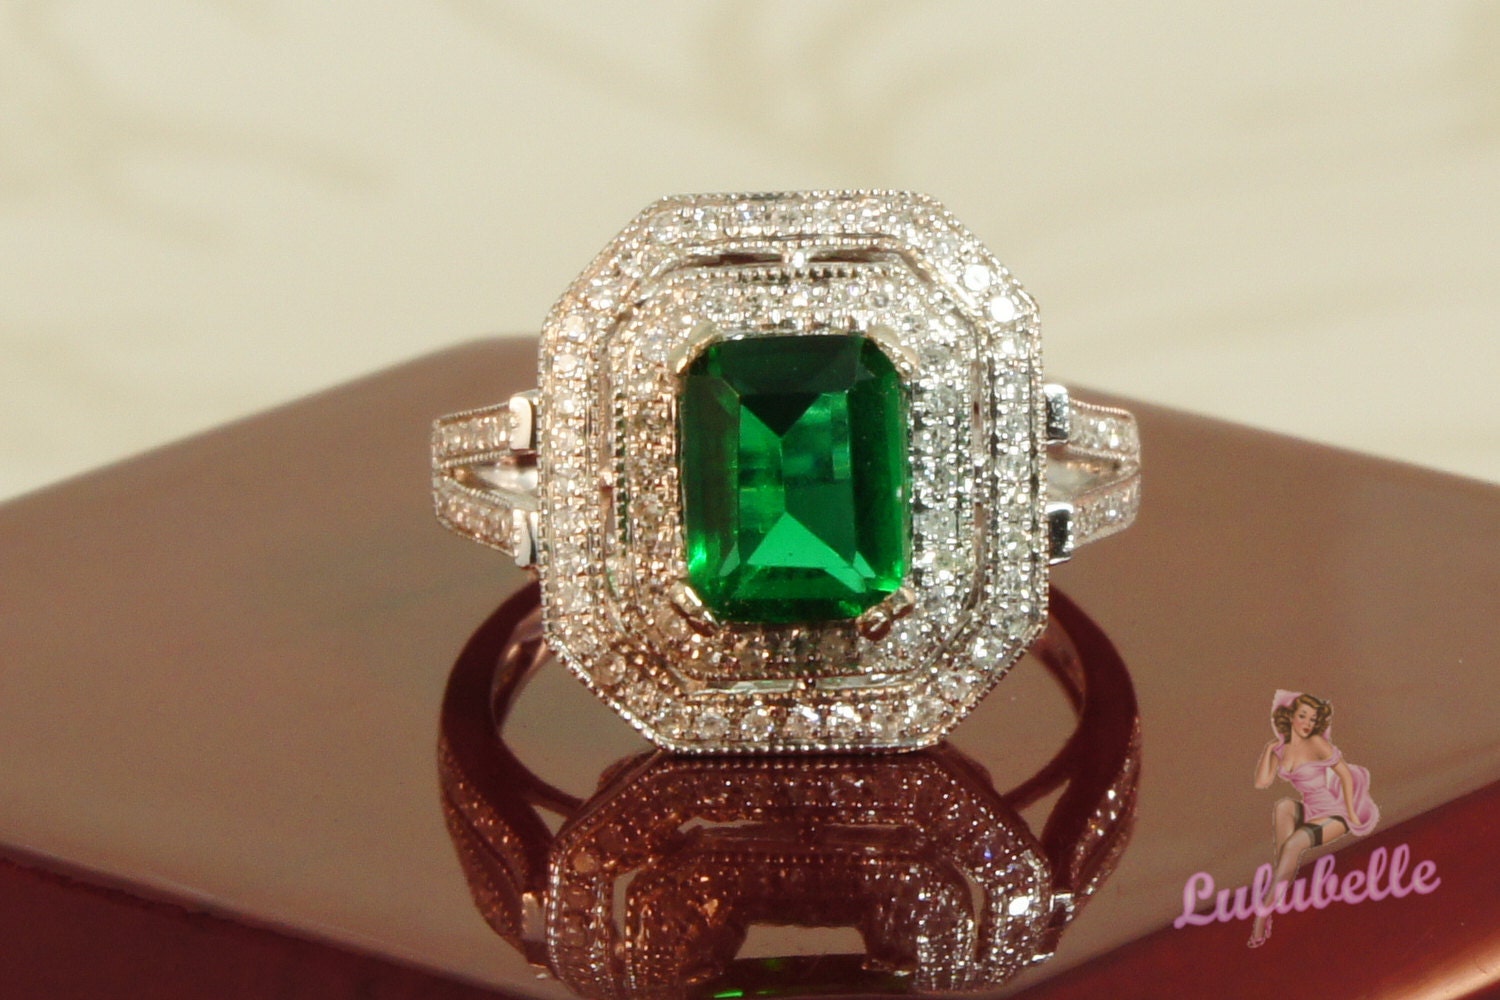 Emerald Art Deco Ring - Green Topaz and Diamond pave hezagon double halo engagement or wedding ring in 14k white gold